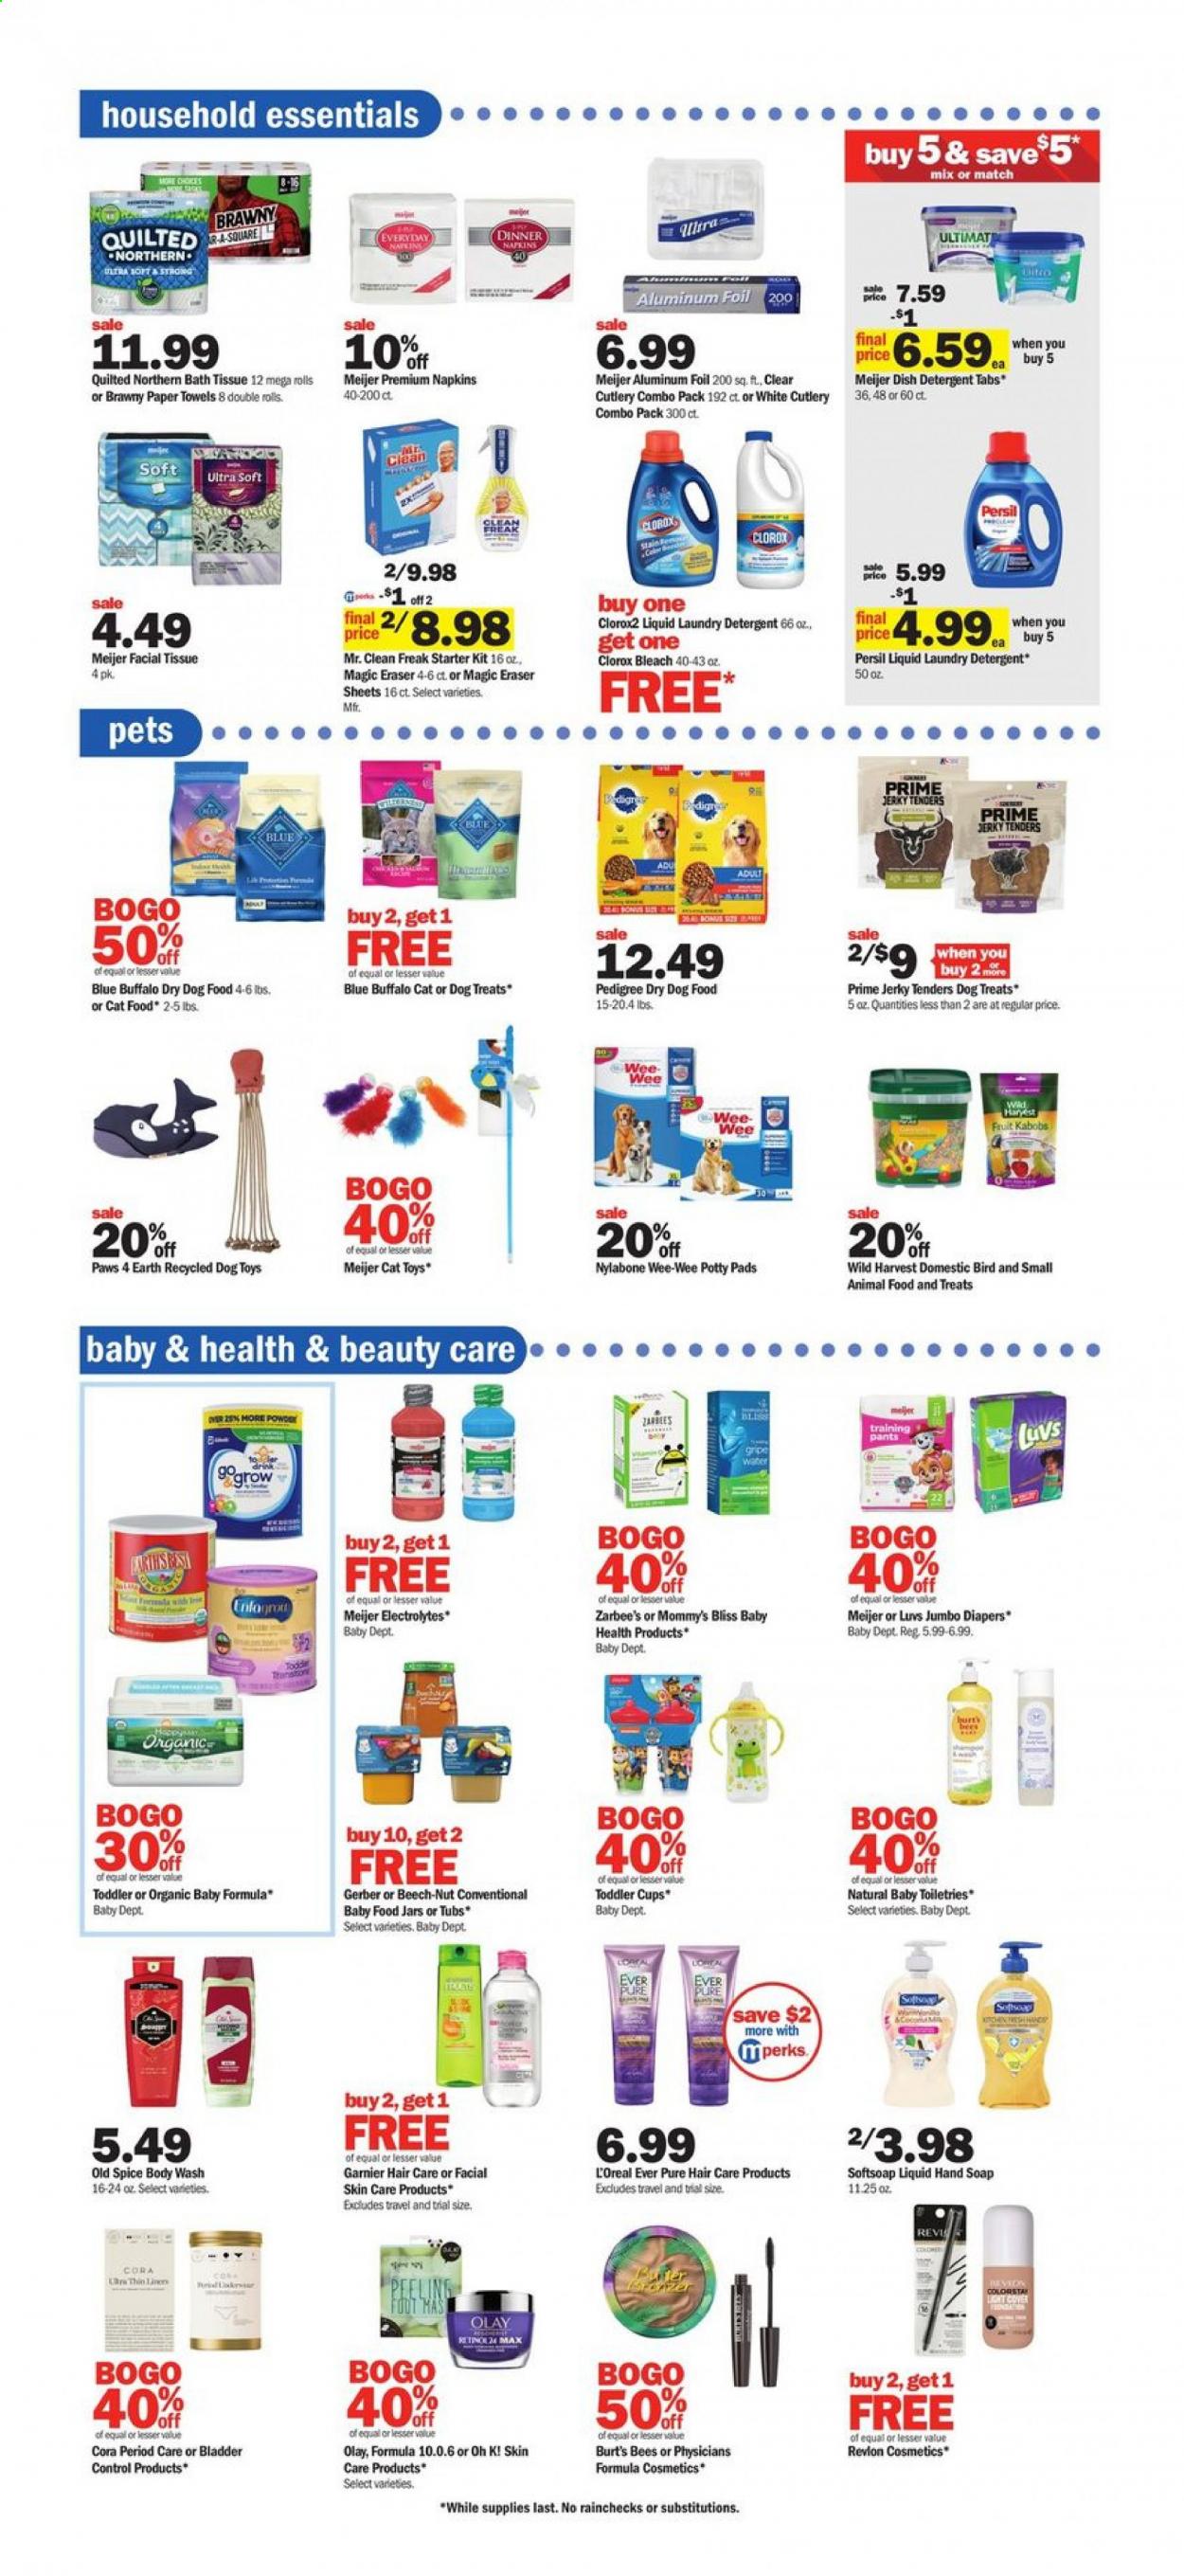 thumbnail - Meijer Flyer - 07/04/2021 - 07/10/2021 - Sales products - Wild Harvest, jerky, Gerber, spice, pants, napkins, nappies, baby pants, bath tissue, Quilted Northern, kitchen towels, paper towels, detergent, bleach, Clorox, Persil, laundry detergent, body wash, Softsoap, hand soap, Old Spice, soap, Garnier, L’Oréal, Olay, Revlon, cup, aluminium foil, jar, eraser, linens, cat toy, dog toy, Nylabone, Wee-Wee, Paws, animal food, Blue Buffalo, cat food, dog food, Pedigree, dry dog food. Page 16.